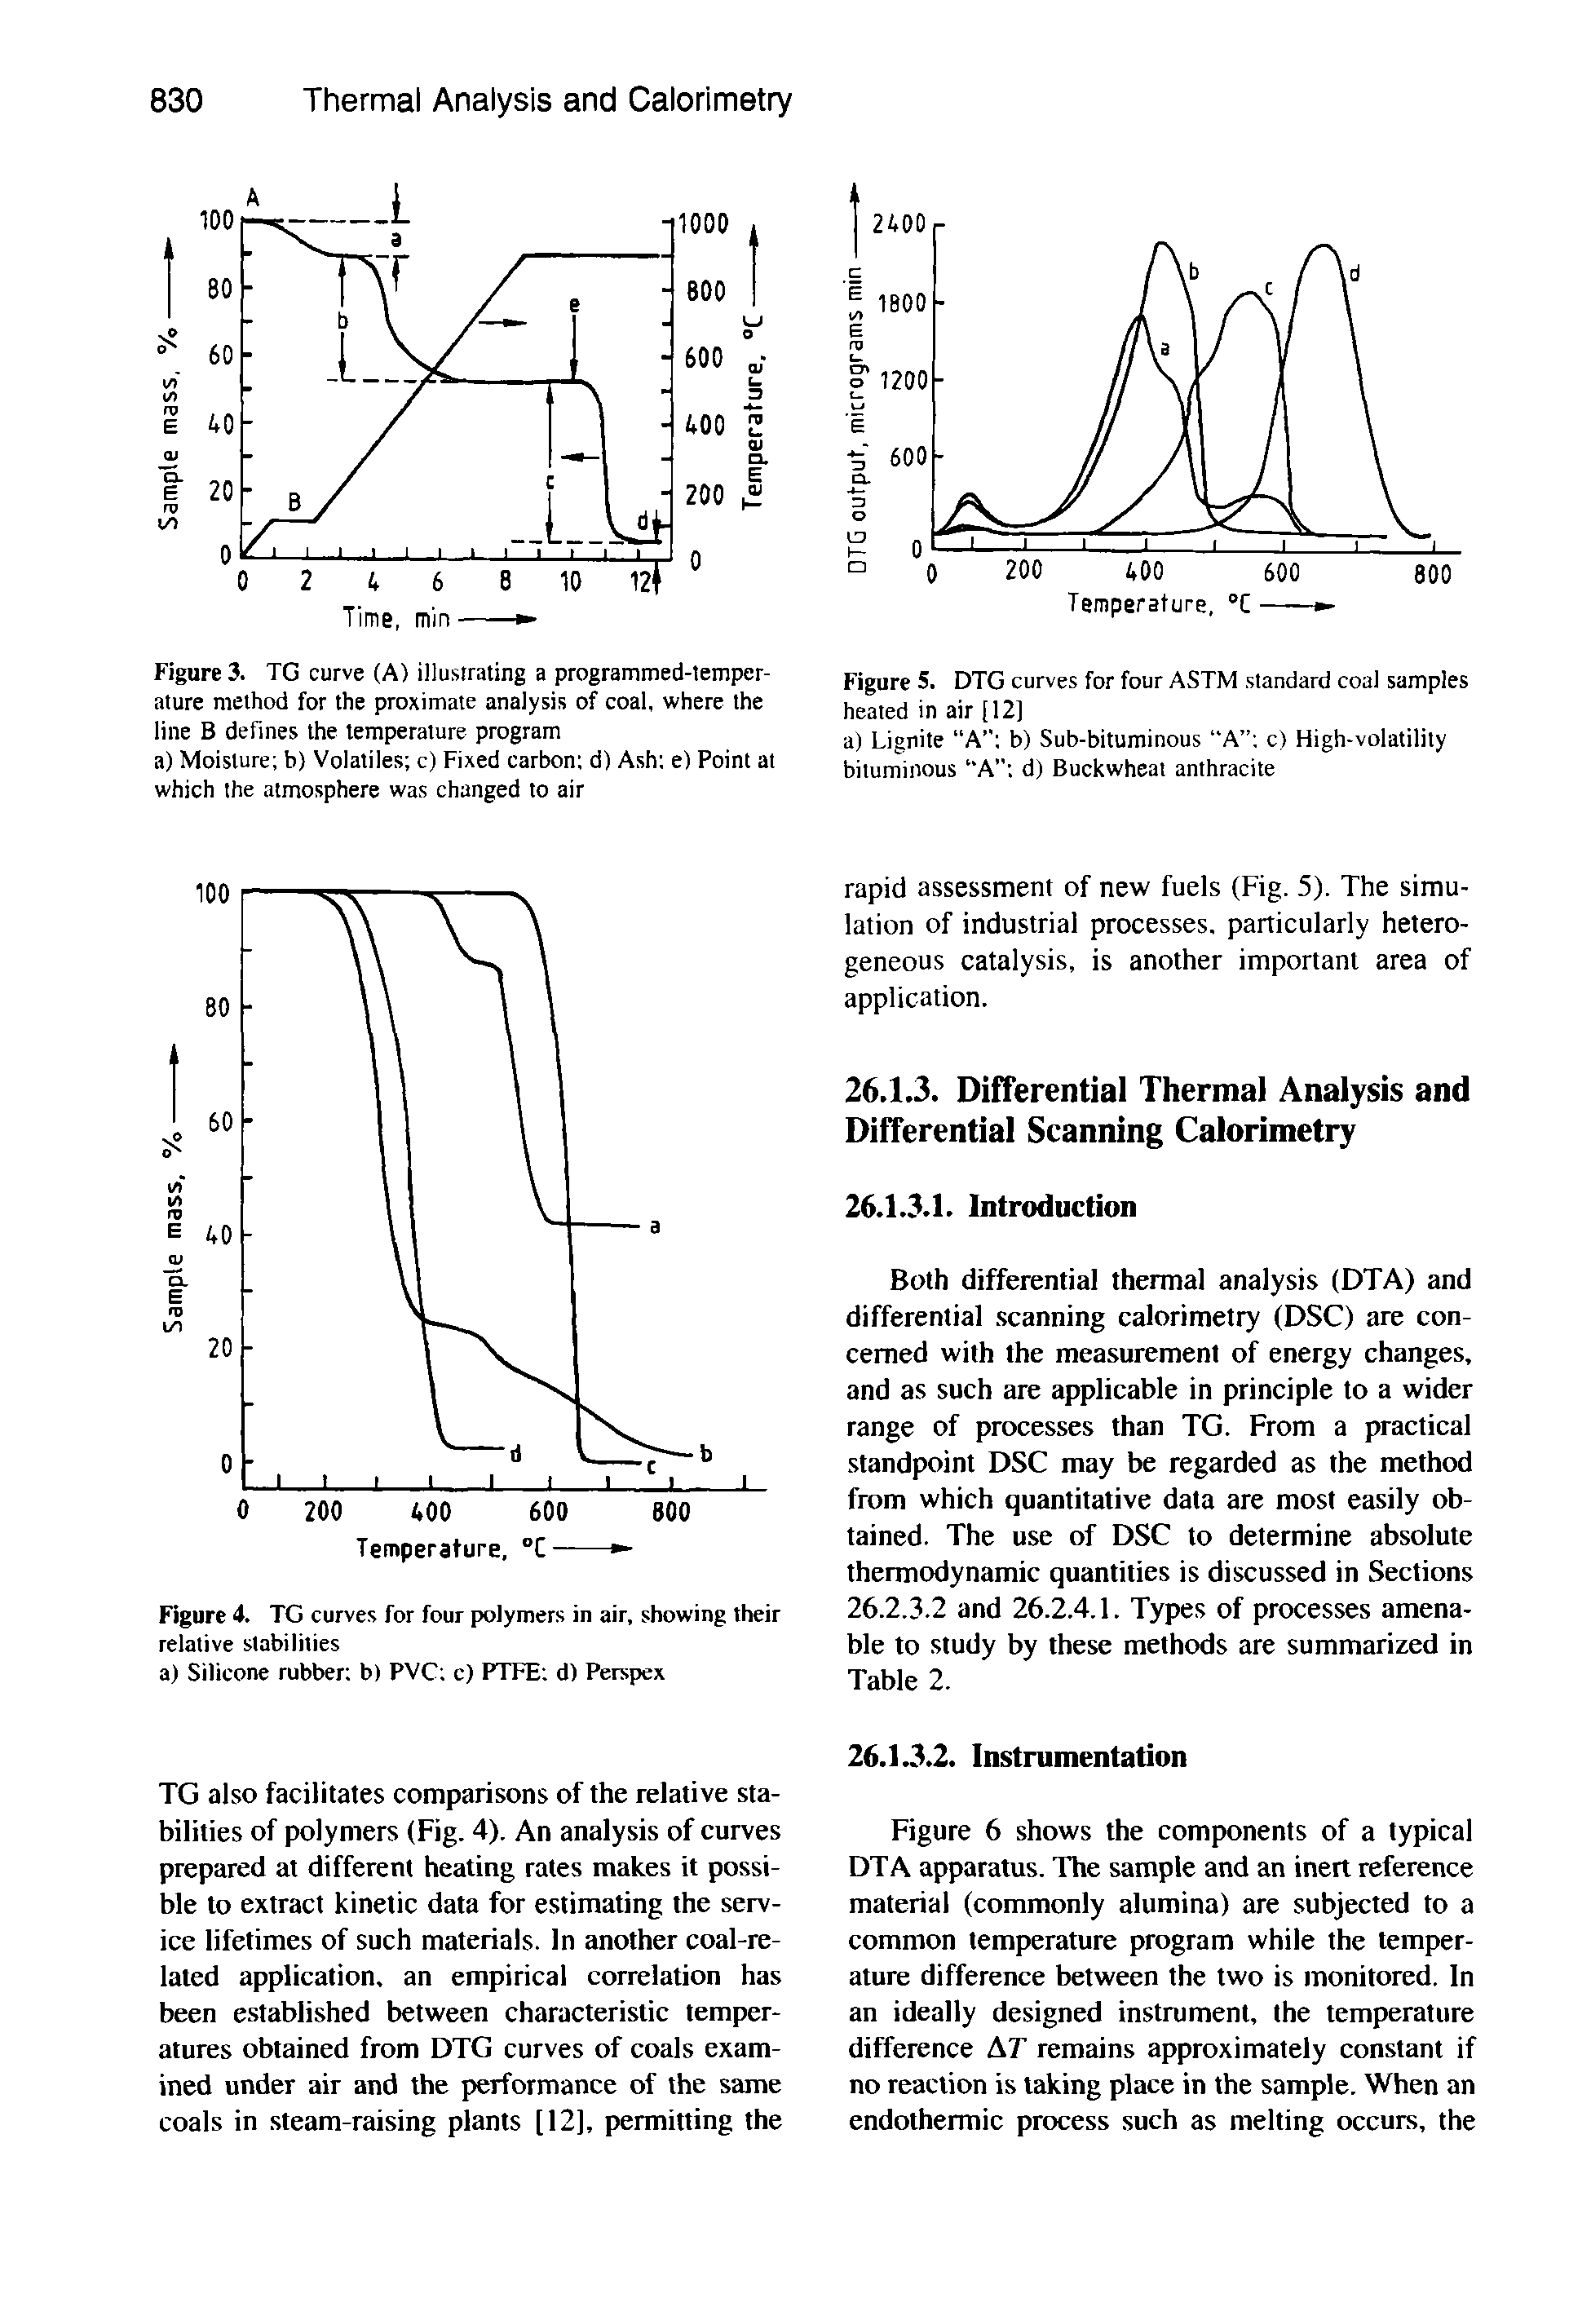 Figure 3. TG curve (A) illustrating a programmed-temper-ature method for the proximate analysis of coal, where the line B defines the temperature program a) Moisture b) Volatiles c) Fixed carbon d) Ash e) Point at which the atmosphere was changed to air...